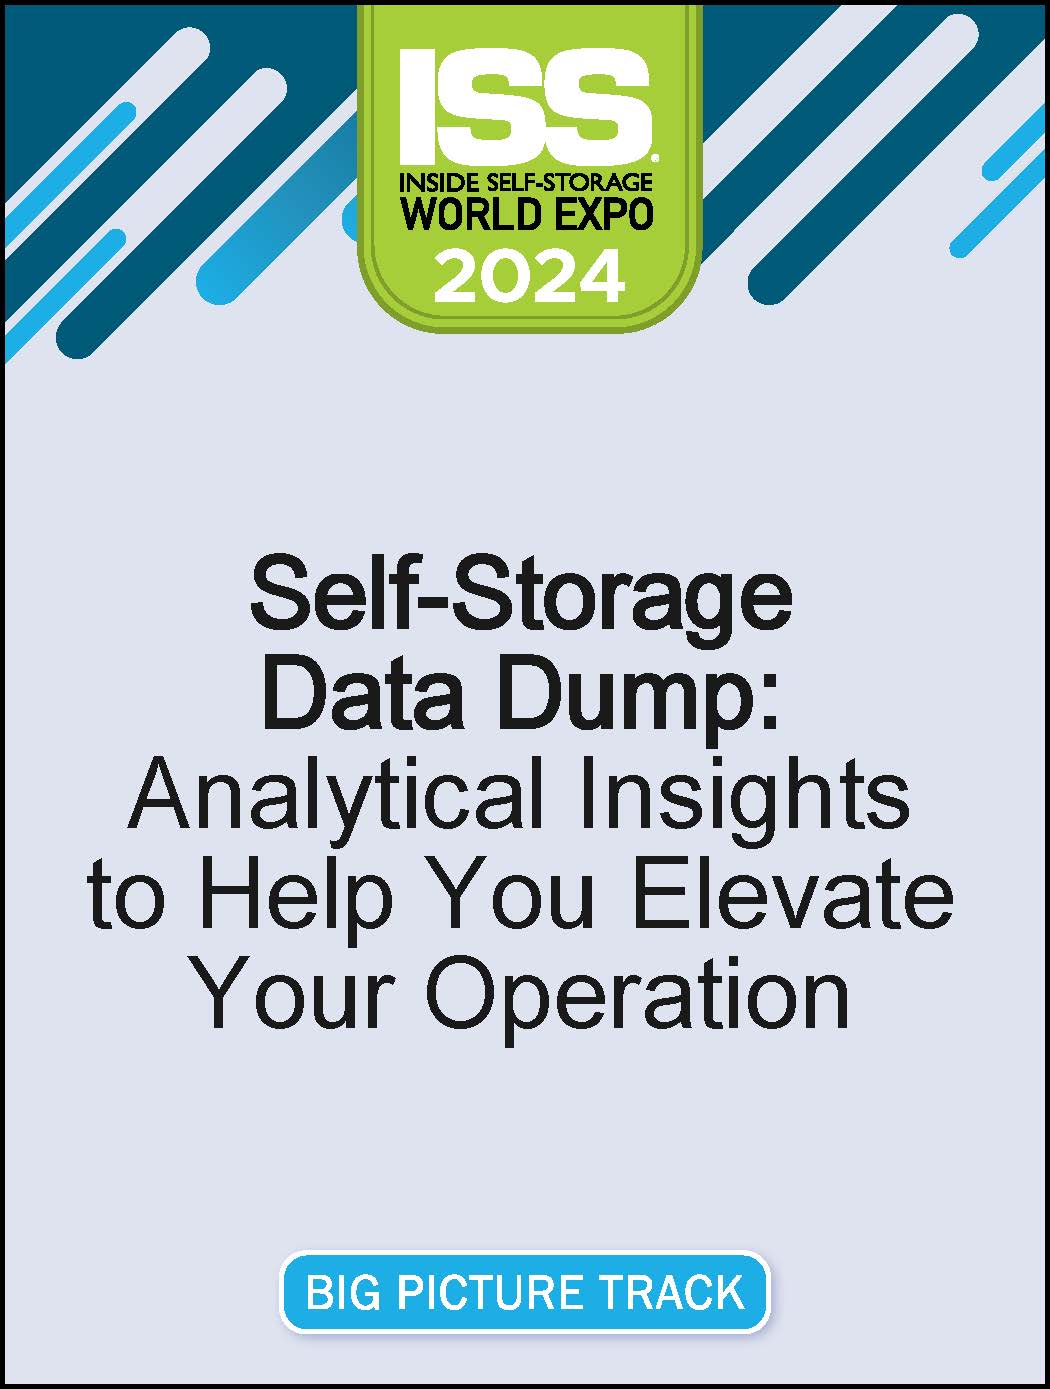 Video Pre-Order Sub - Self-Storage Data Dump: Analytical Insights to Help You Elevate Your Operation